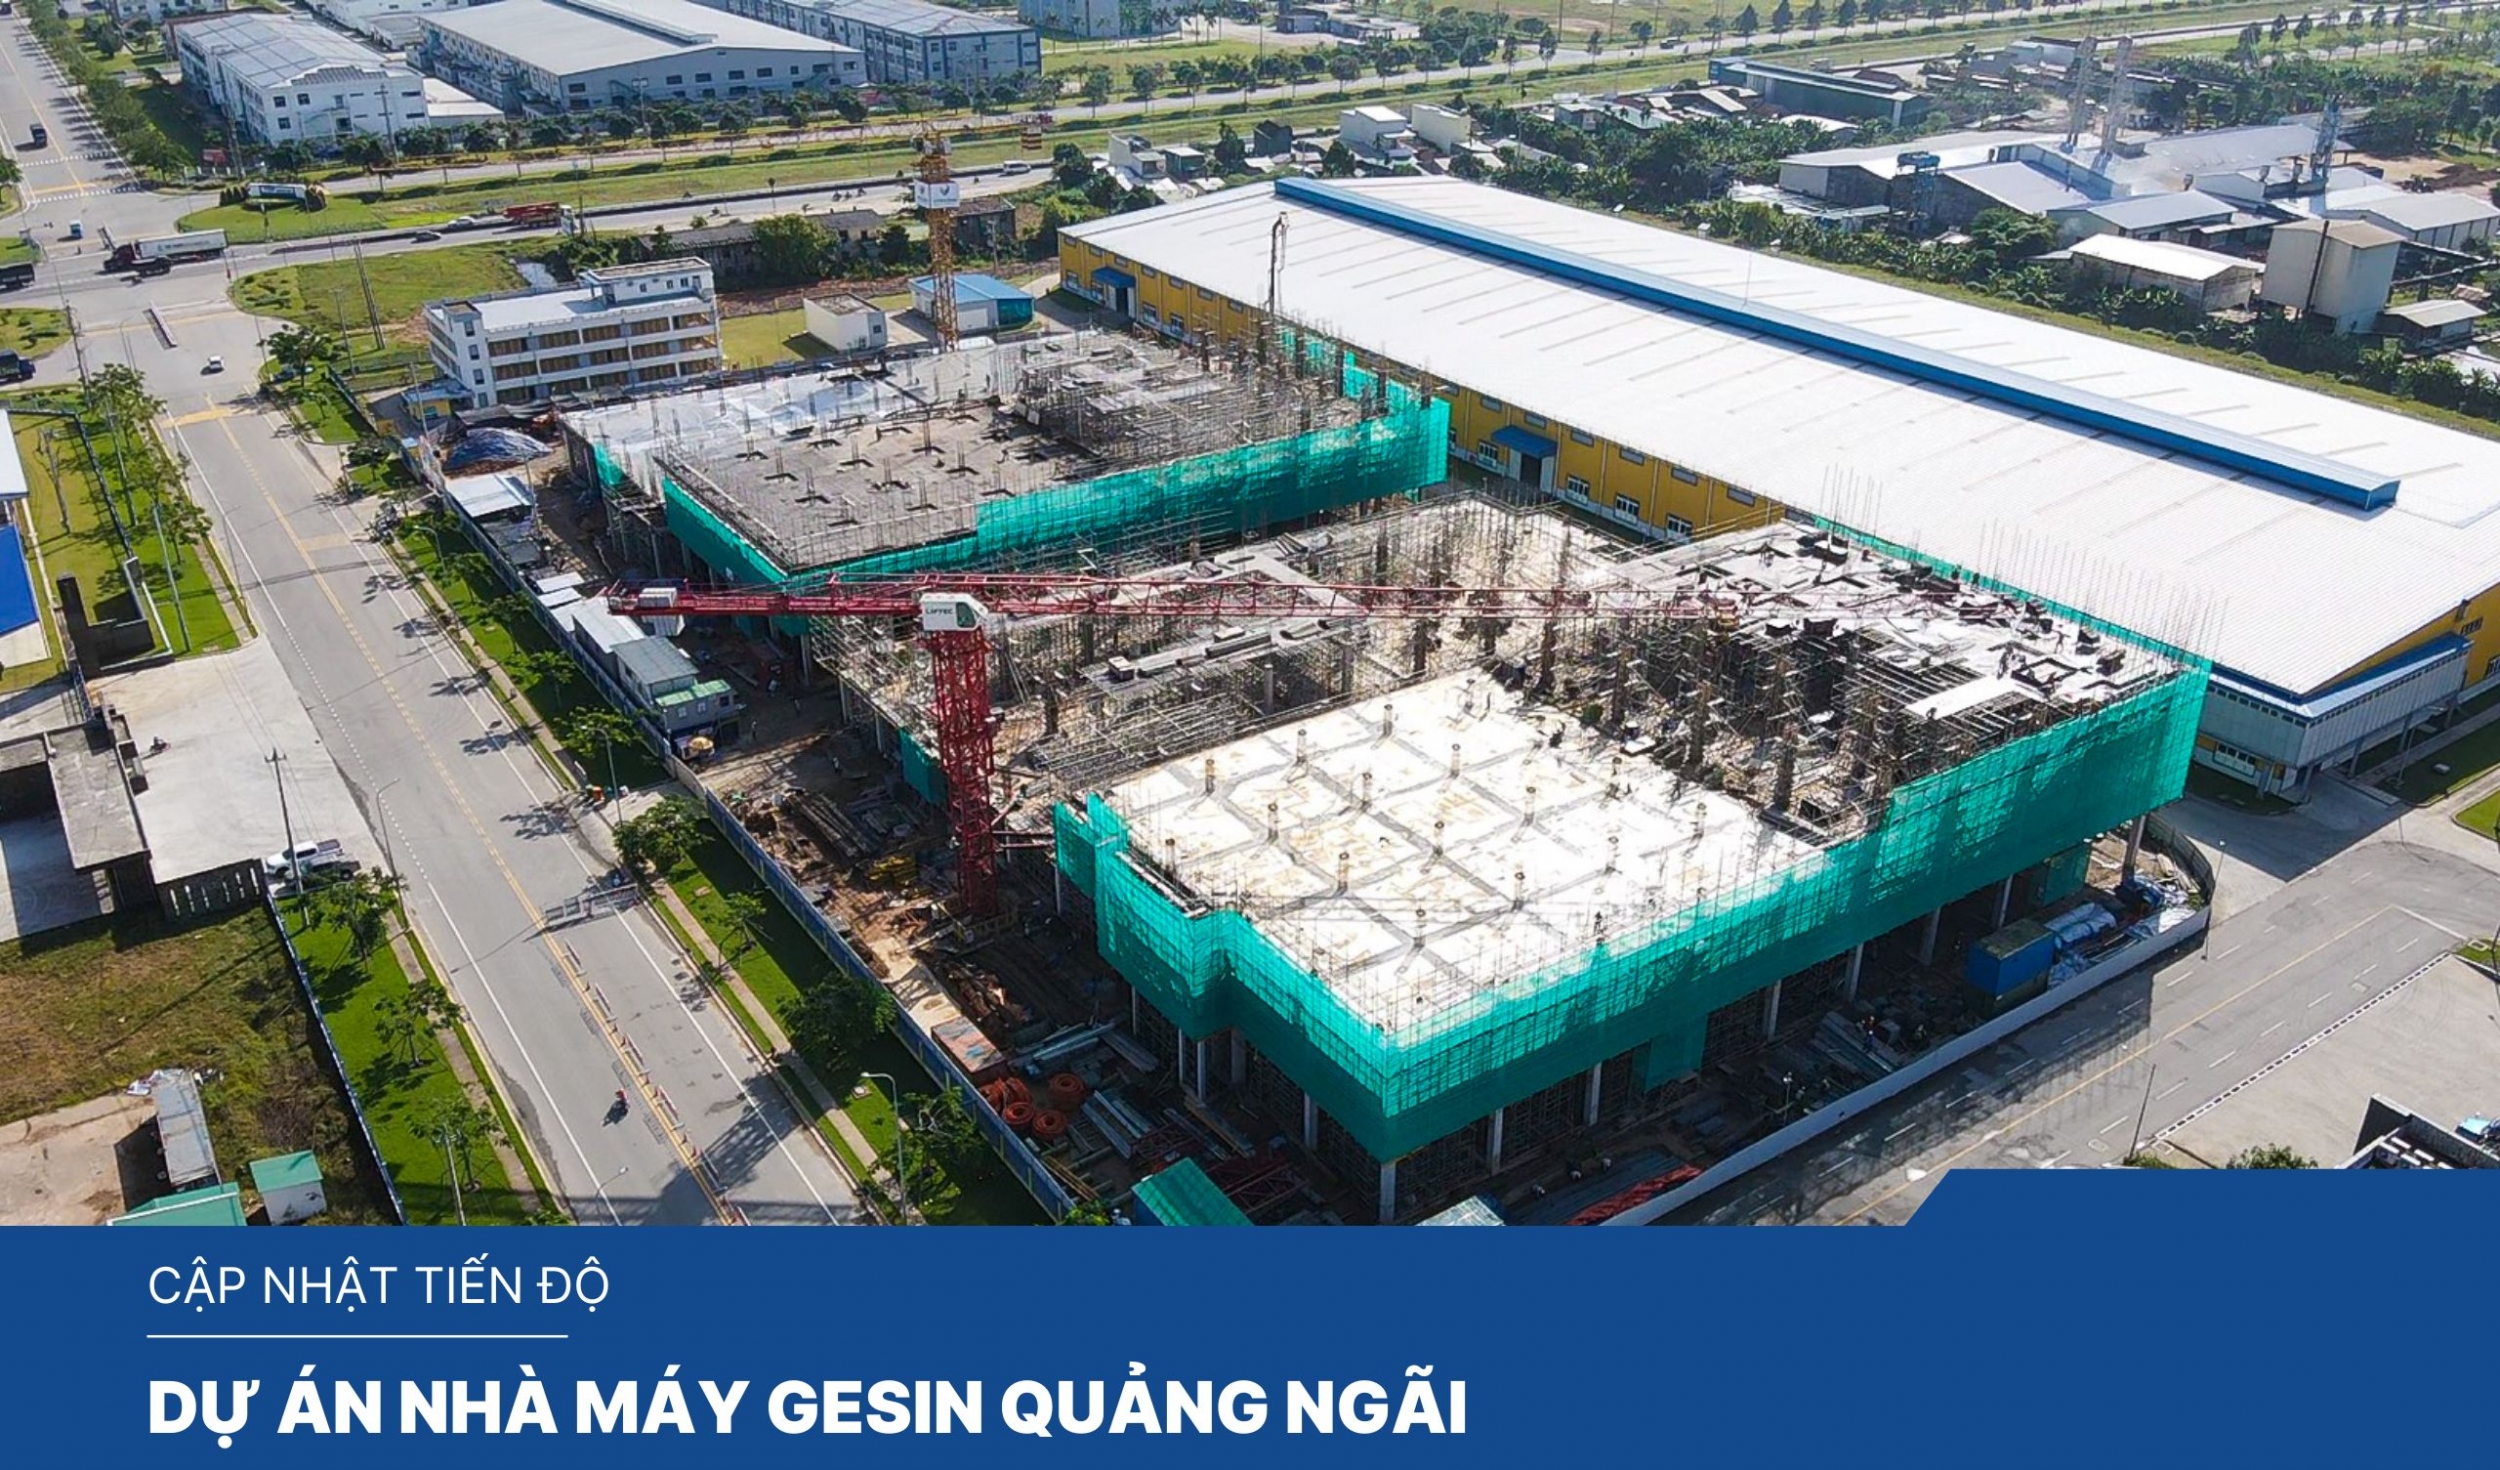 UPDATE ON THE PROGRESS OF GESIN NGAI FACTORY PROJECT